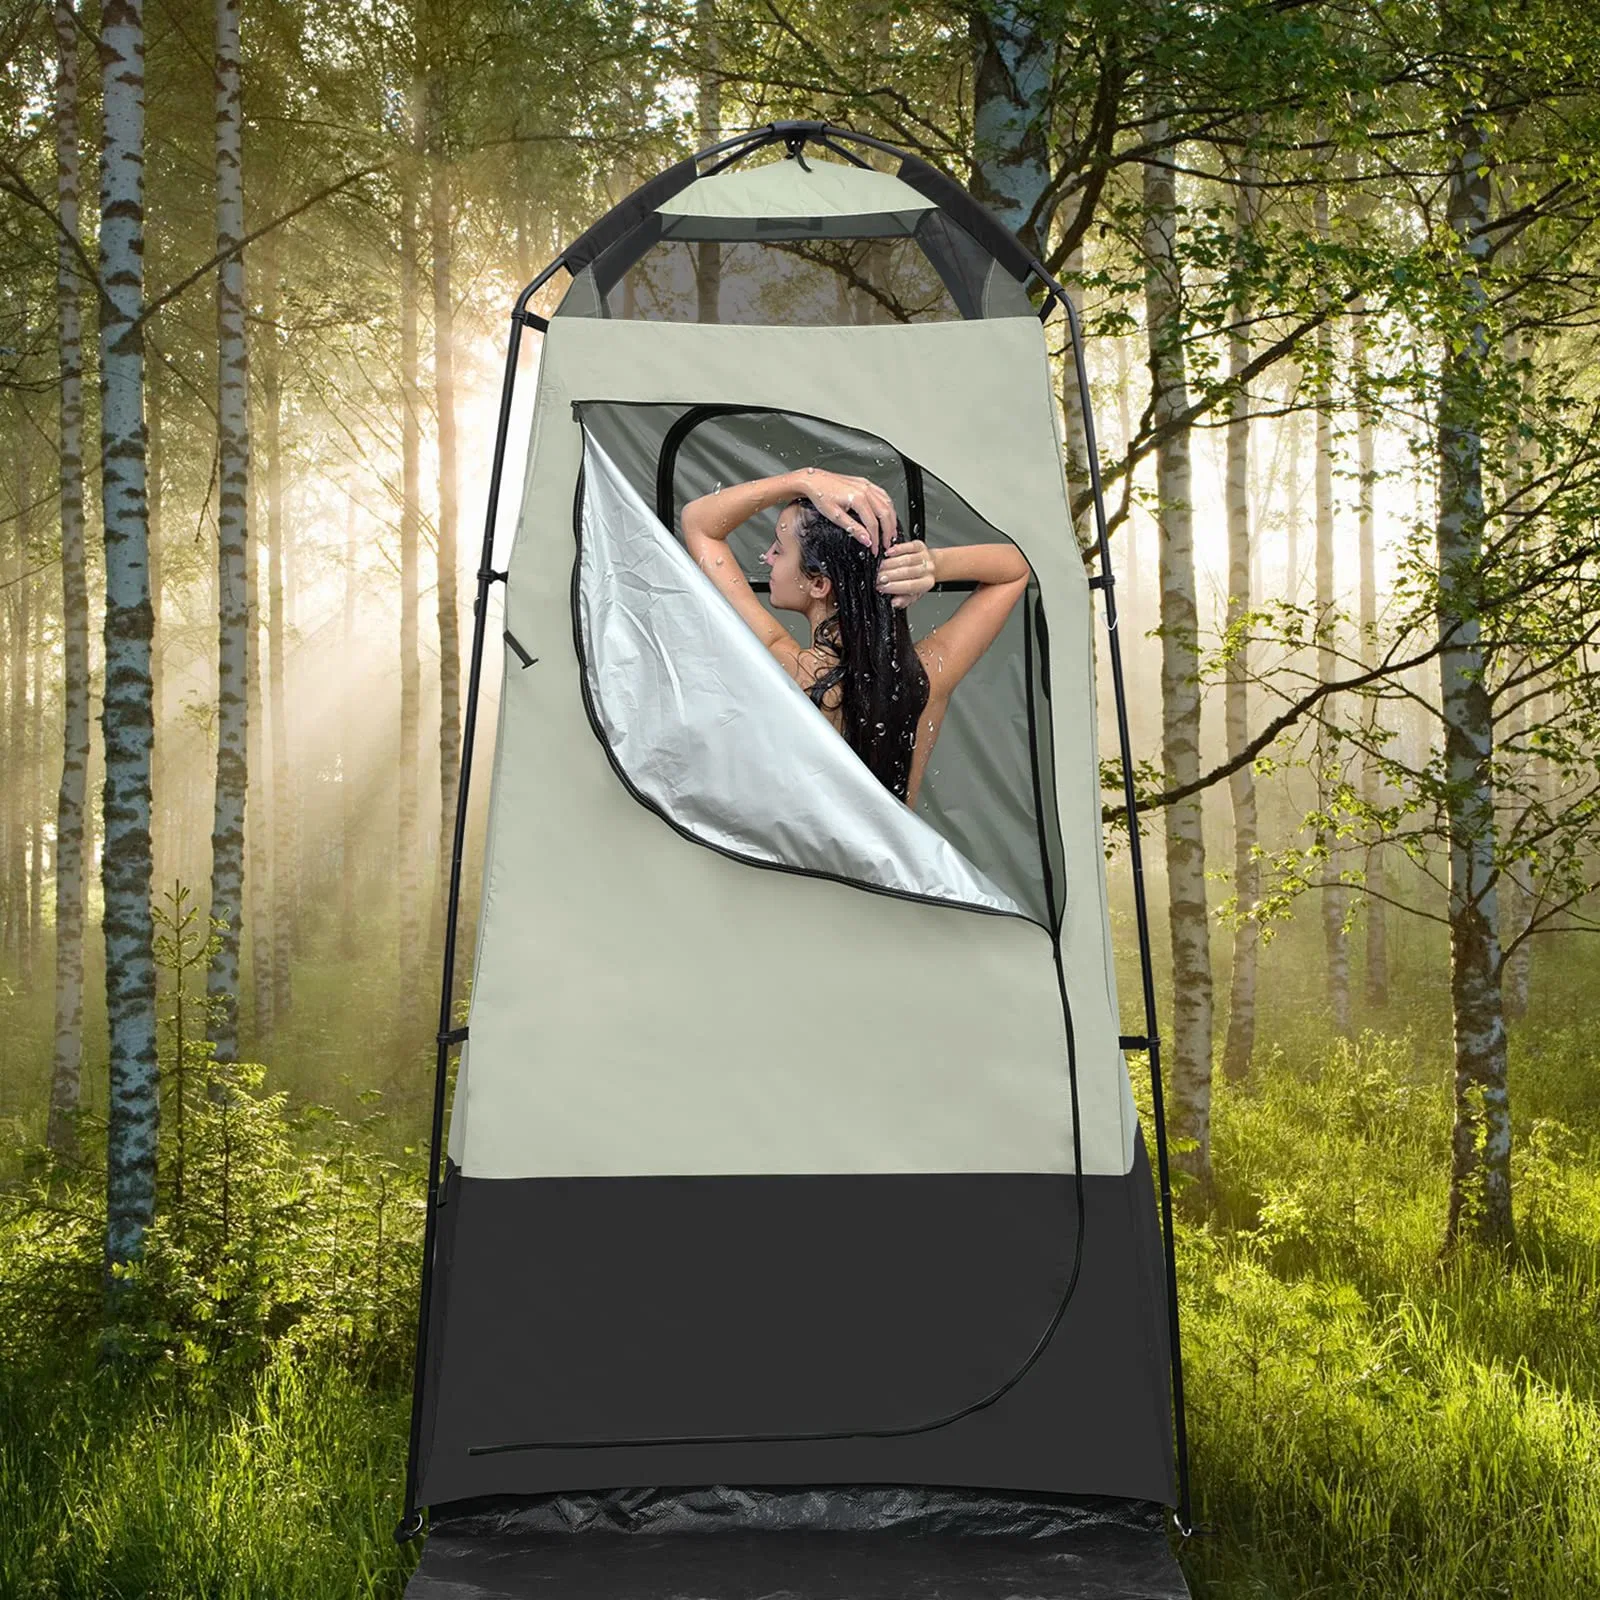 Rain Shelter Portable Toilet Dressing Changing Room Privacy Camping Beach Shower Tent